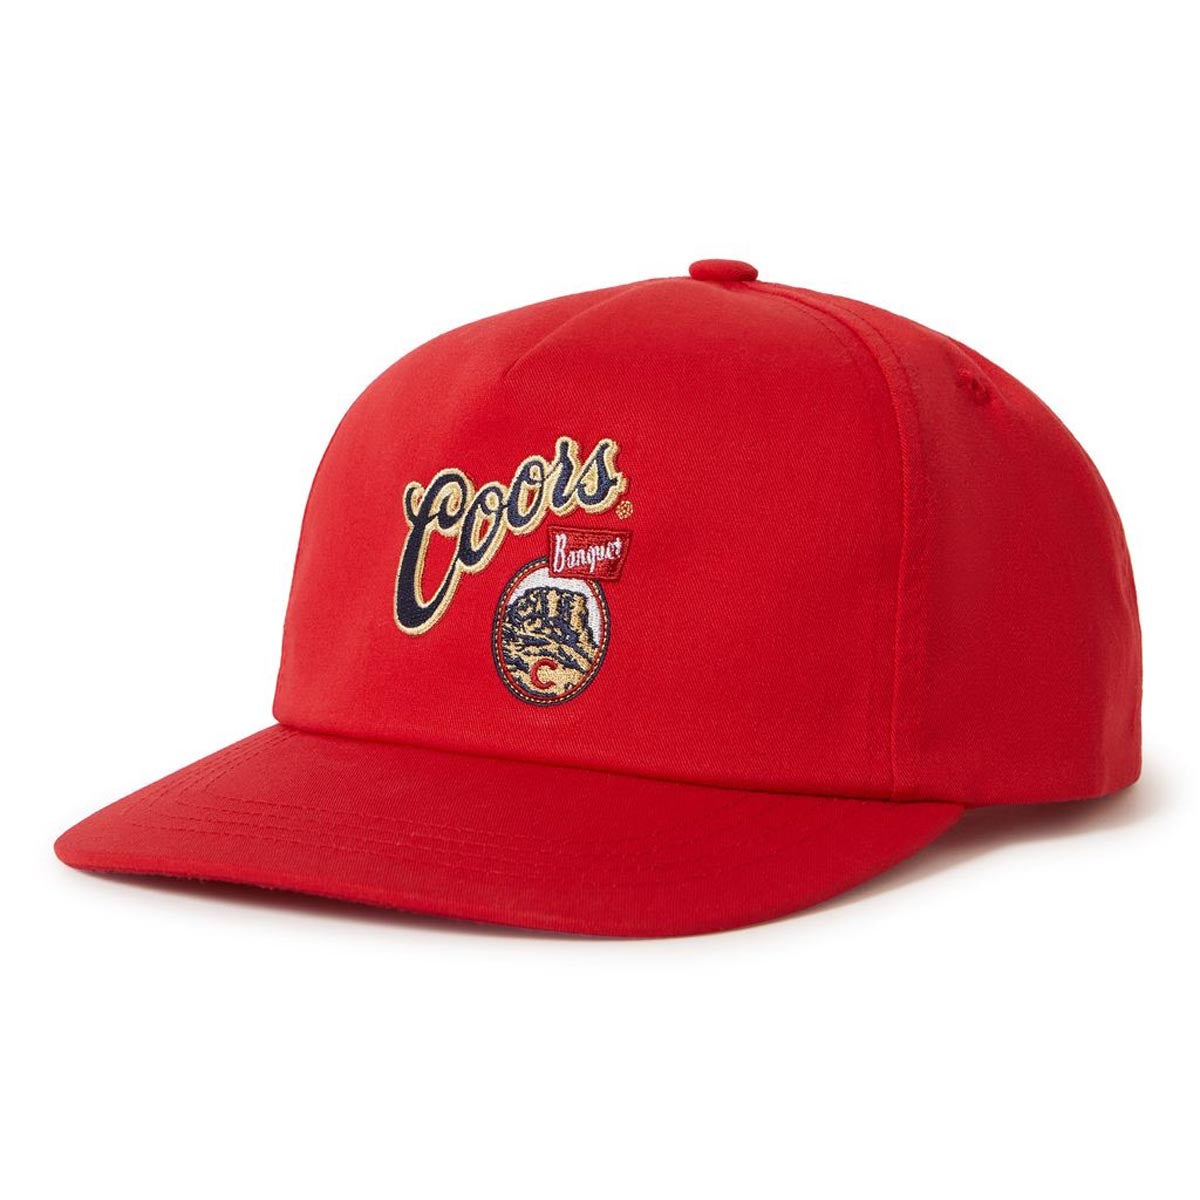 Brixton x Coors Banquet Hops Snapback Hat - Red image 1